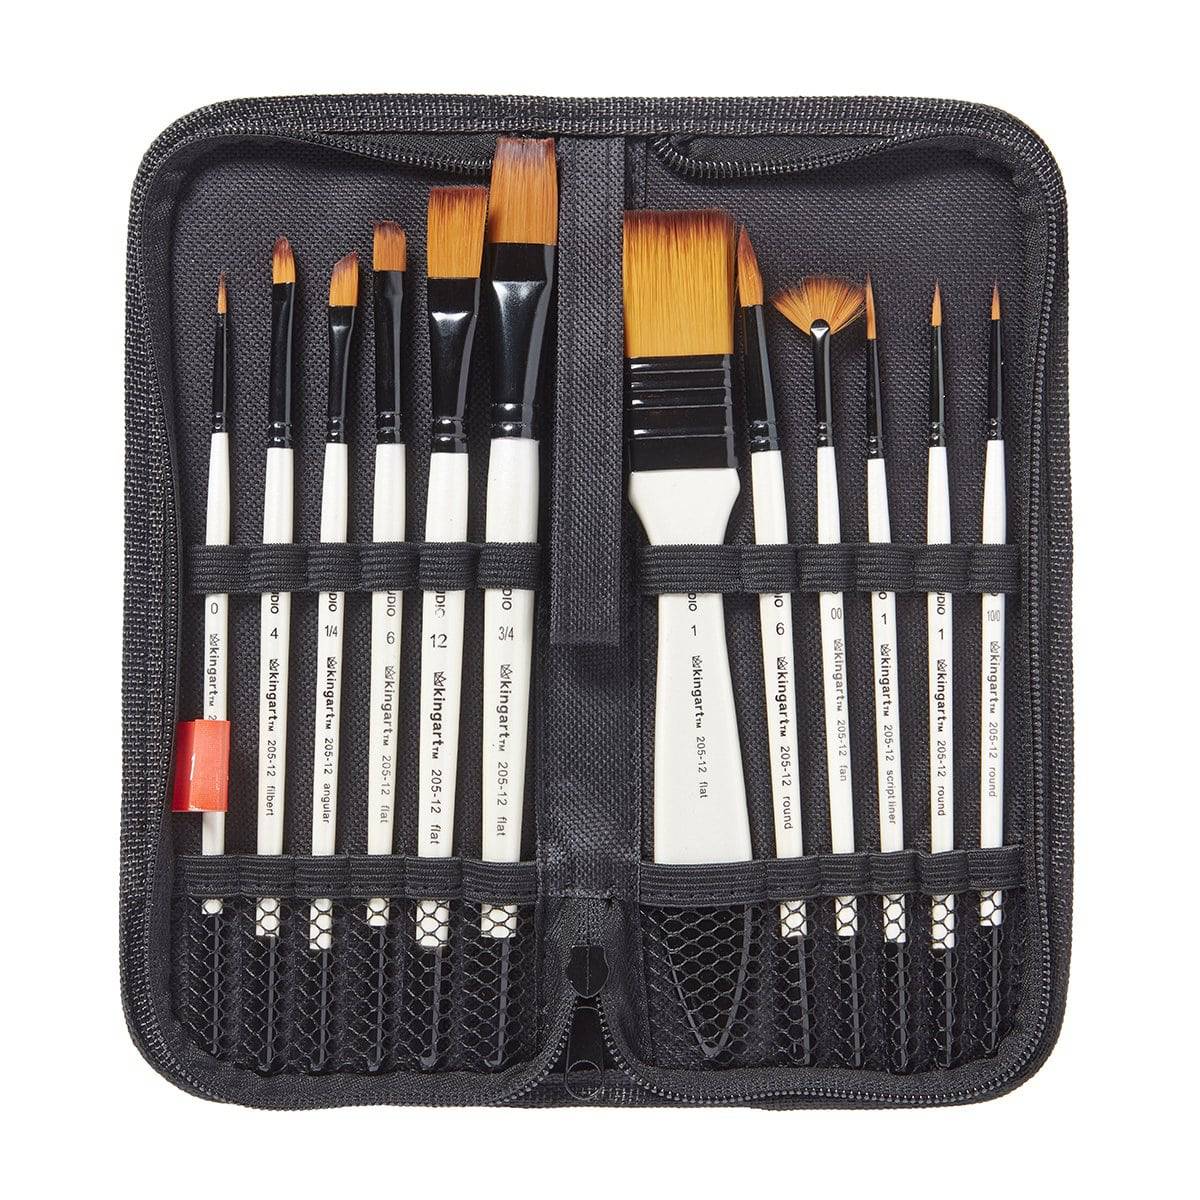 Fine Tip Detail Paint Brushes  12 pc Thin & Small Paint Brush Set